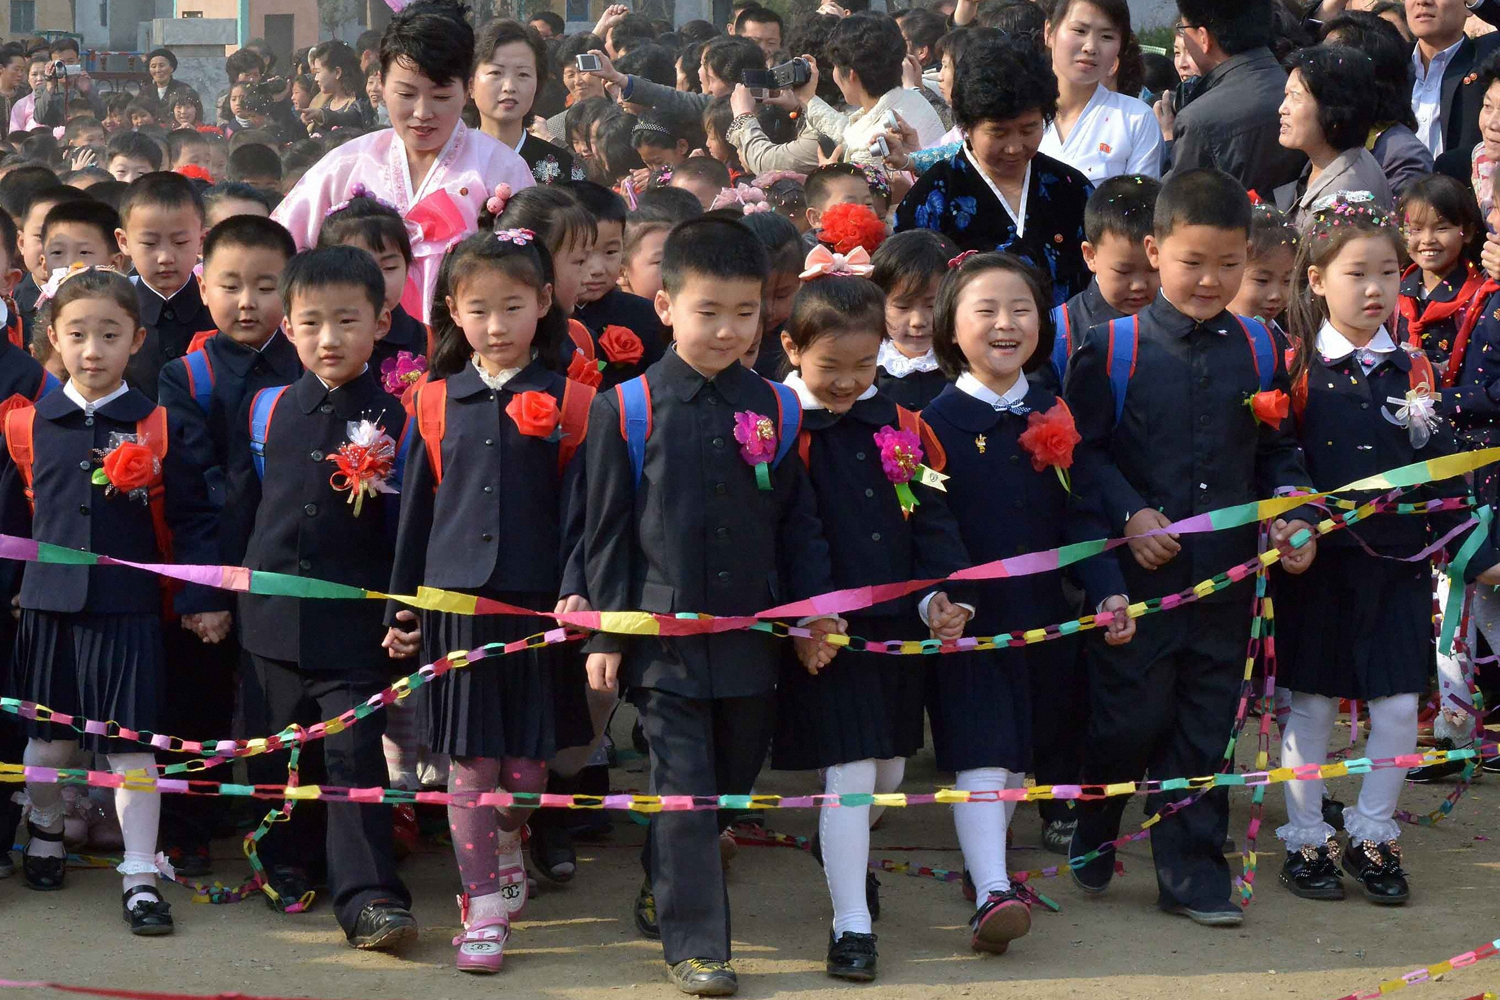 New first-year pupils attend a primary school in Pyongyang on April 1, 2014. The duration of primary school education was extended from four years to five in North Korea the same day, Pyongyang's official Korean Central News Agency reported.